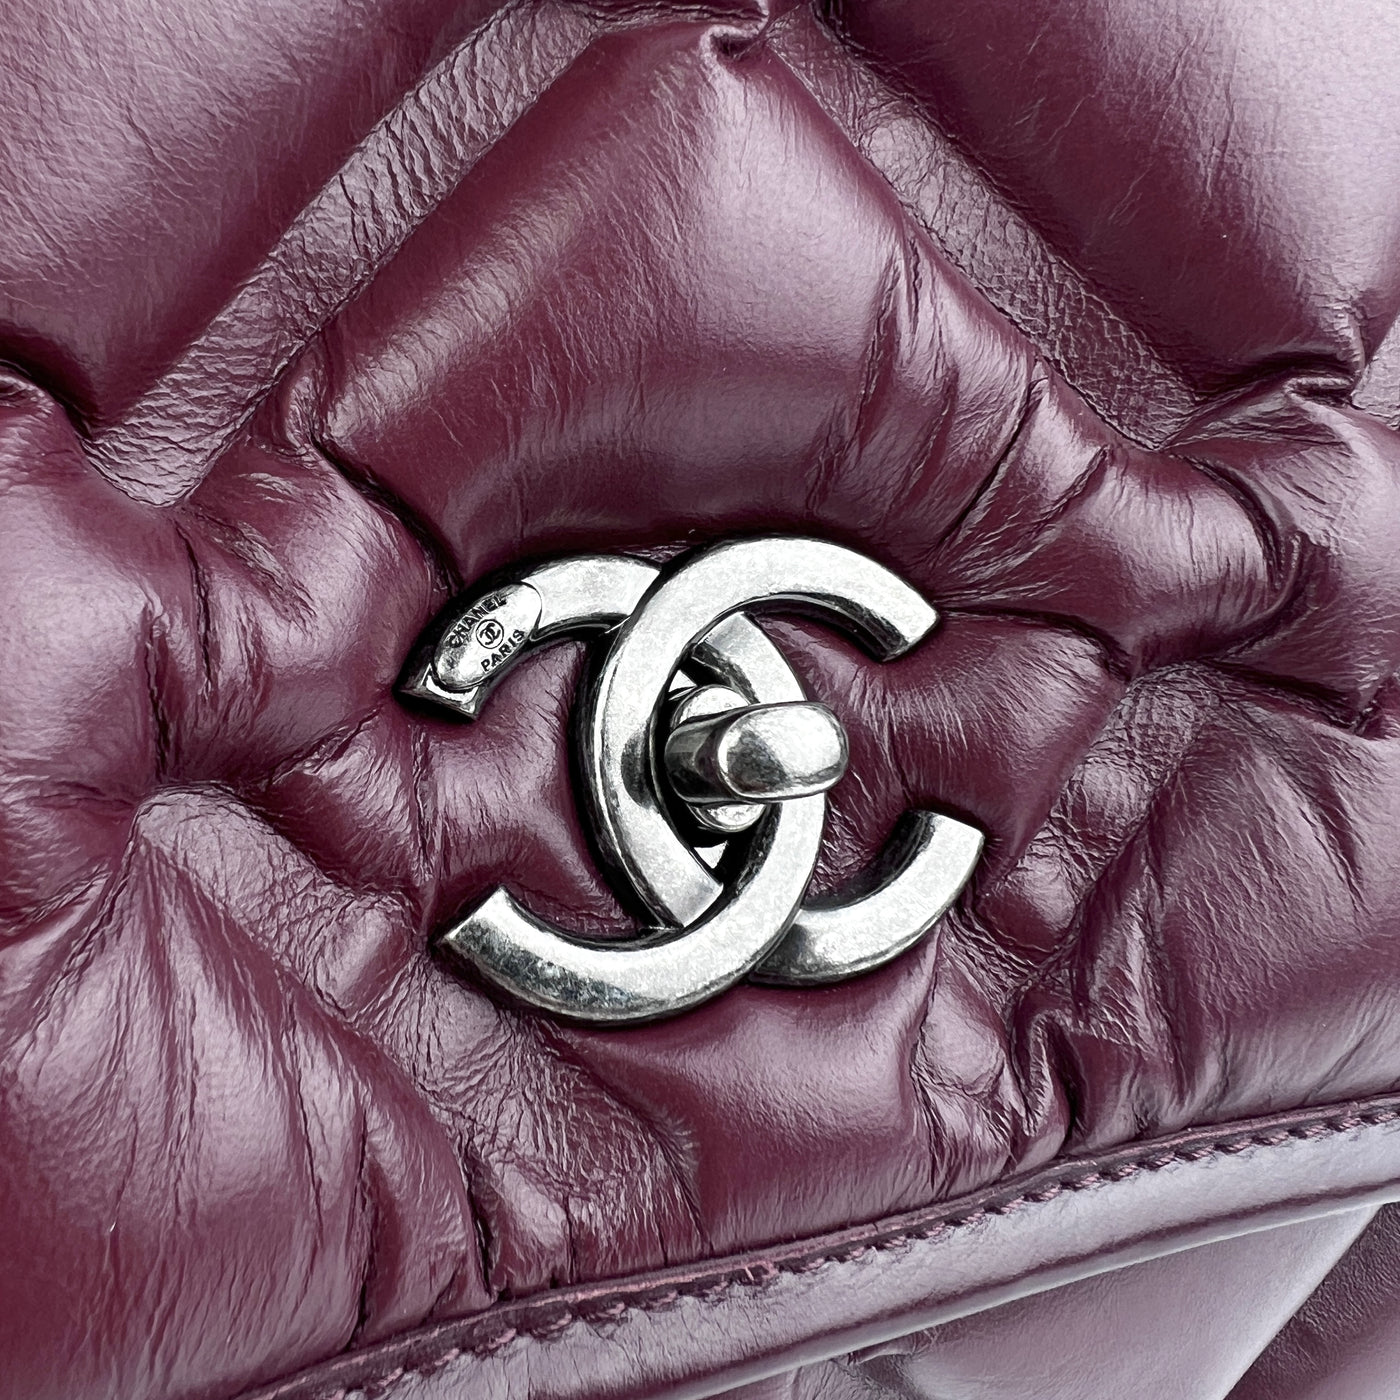 Chanel Chesterfield Flap Bag Quilted Calfskin Jumbo